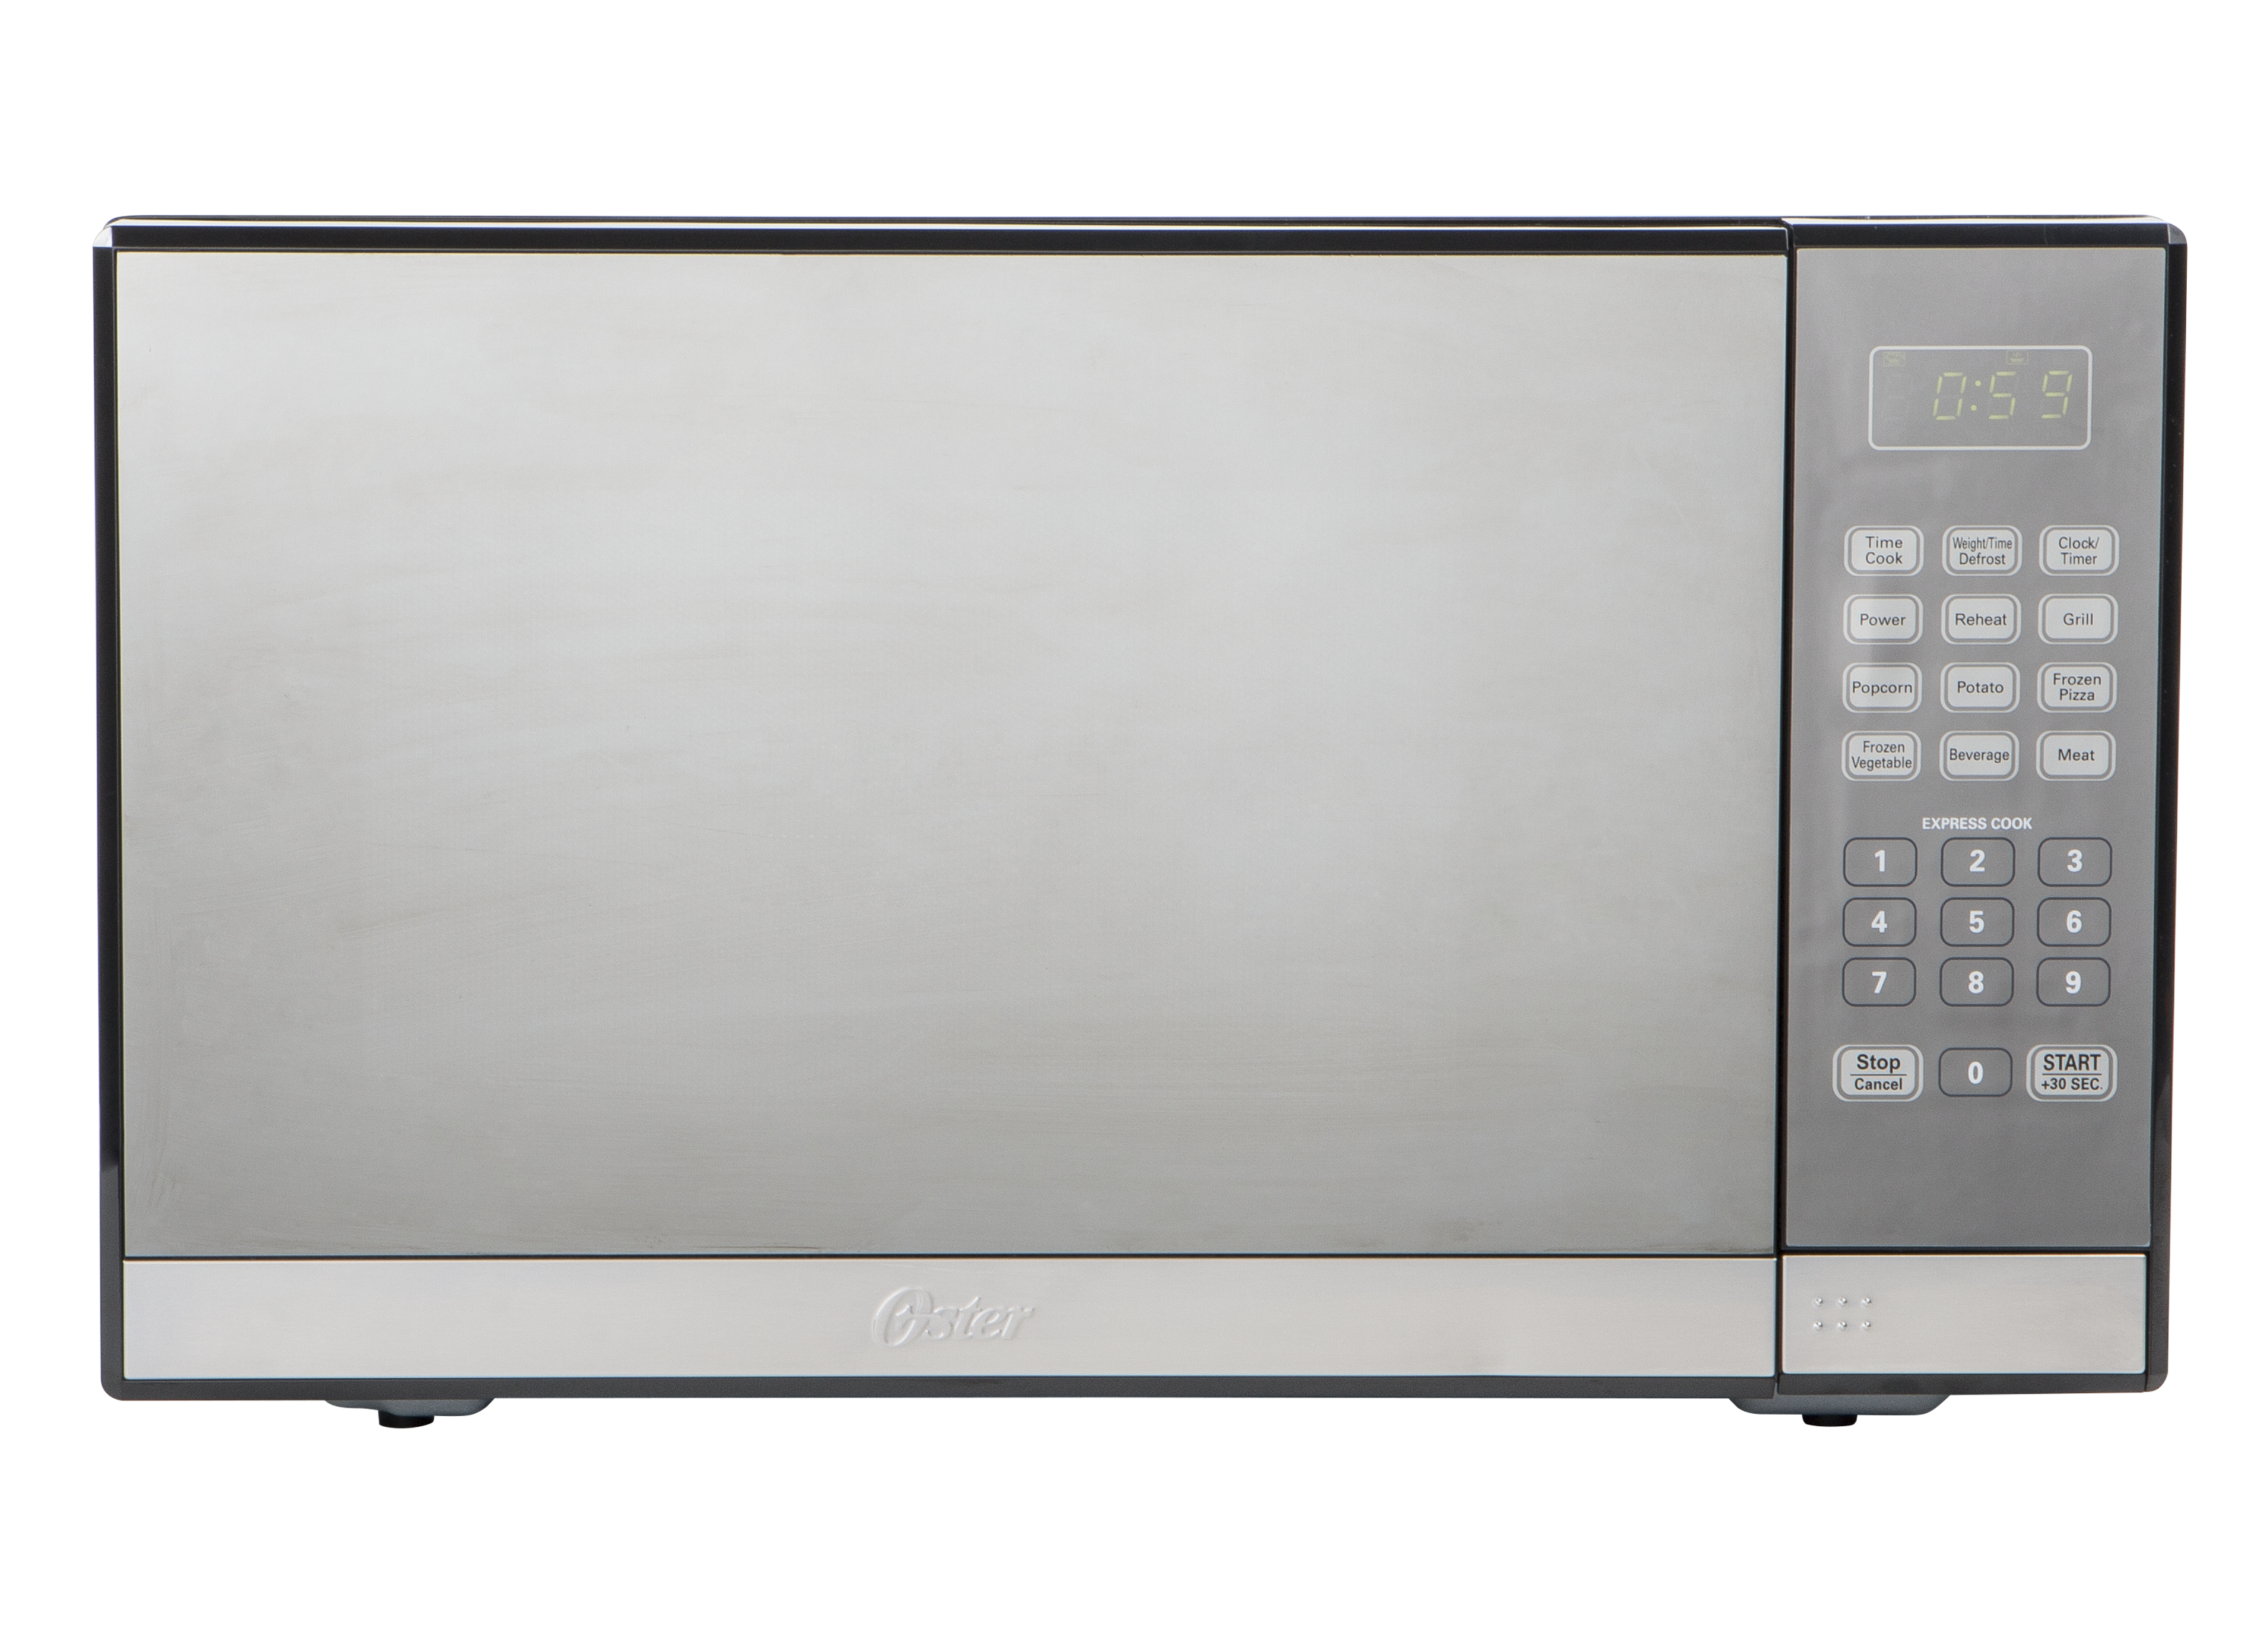 https://crdms.images.consumerreports.org/prod/products/cr/models/389276-countertopmicrowaveovens-oster-eg034al7x1.png